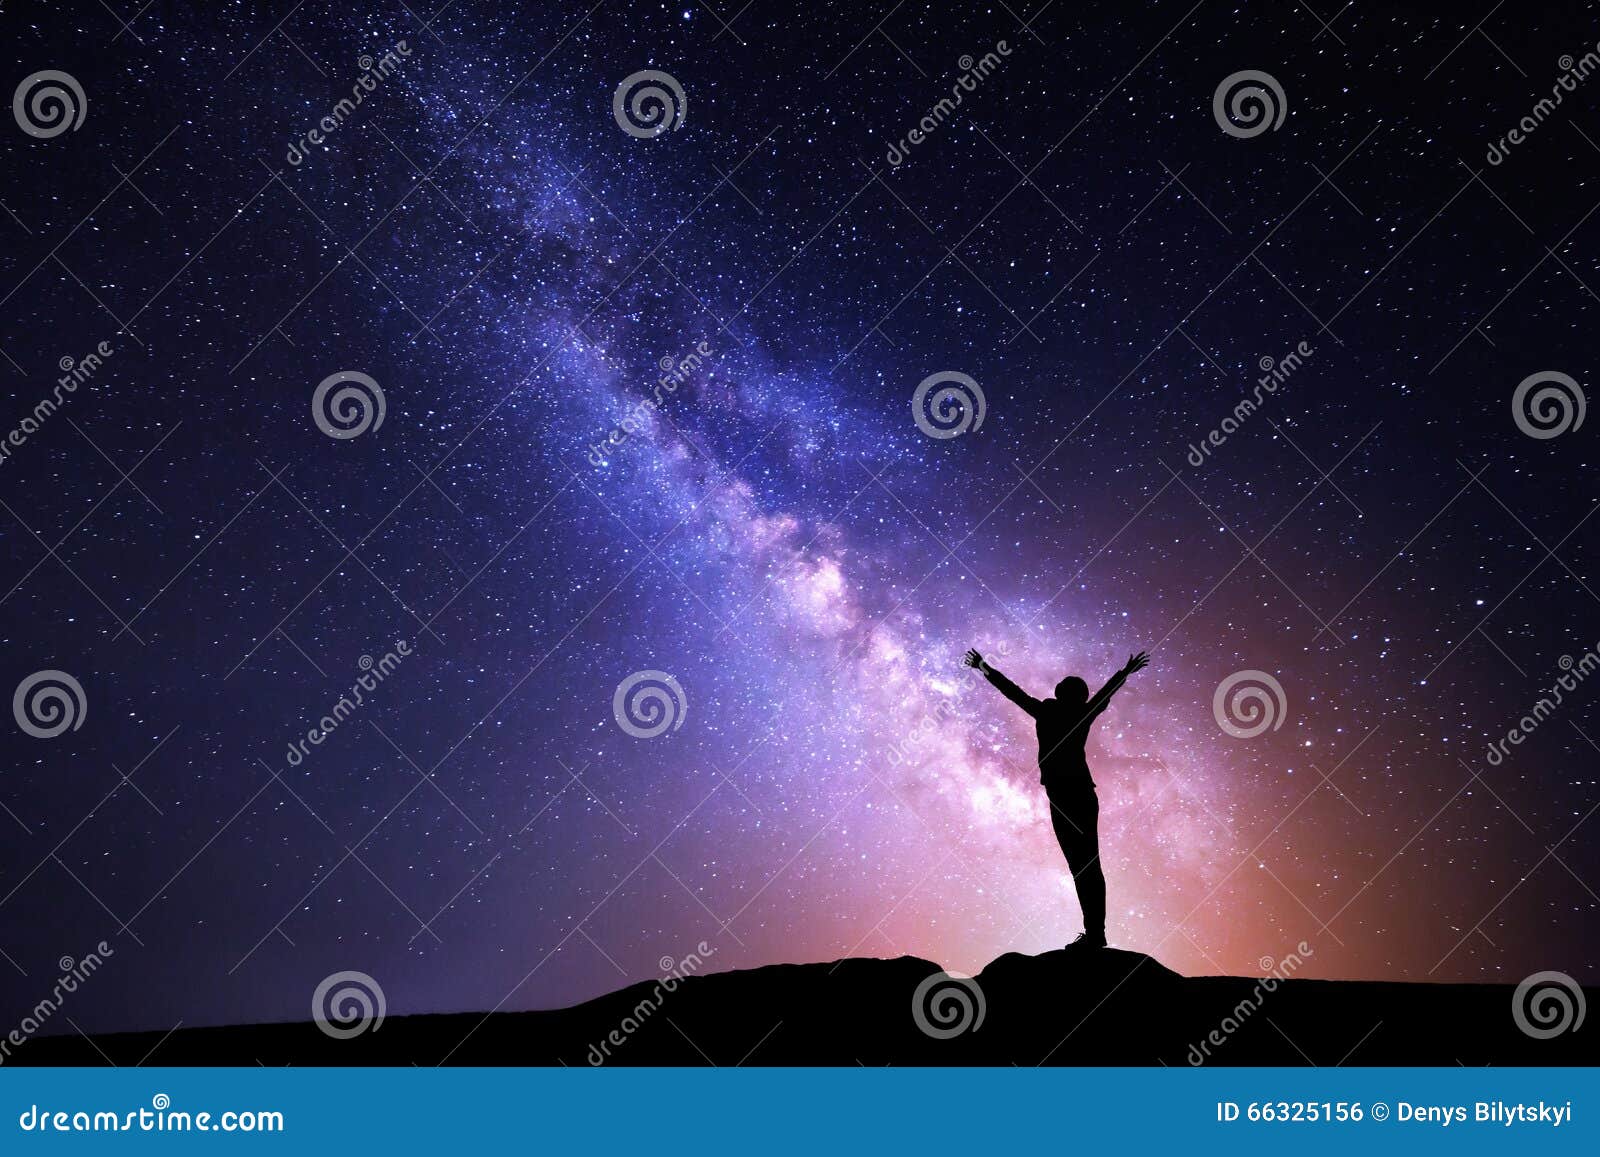 milky way. night sky and silhouette of a standing girl